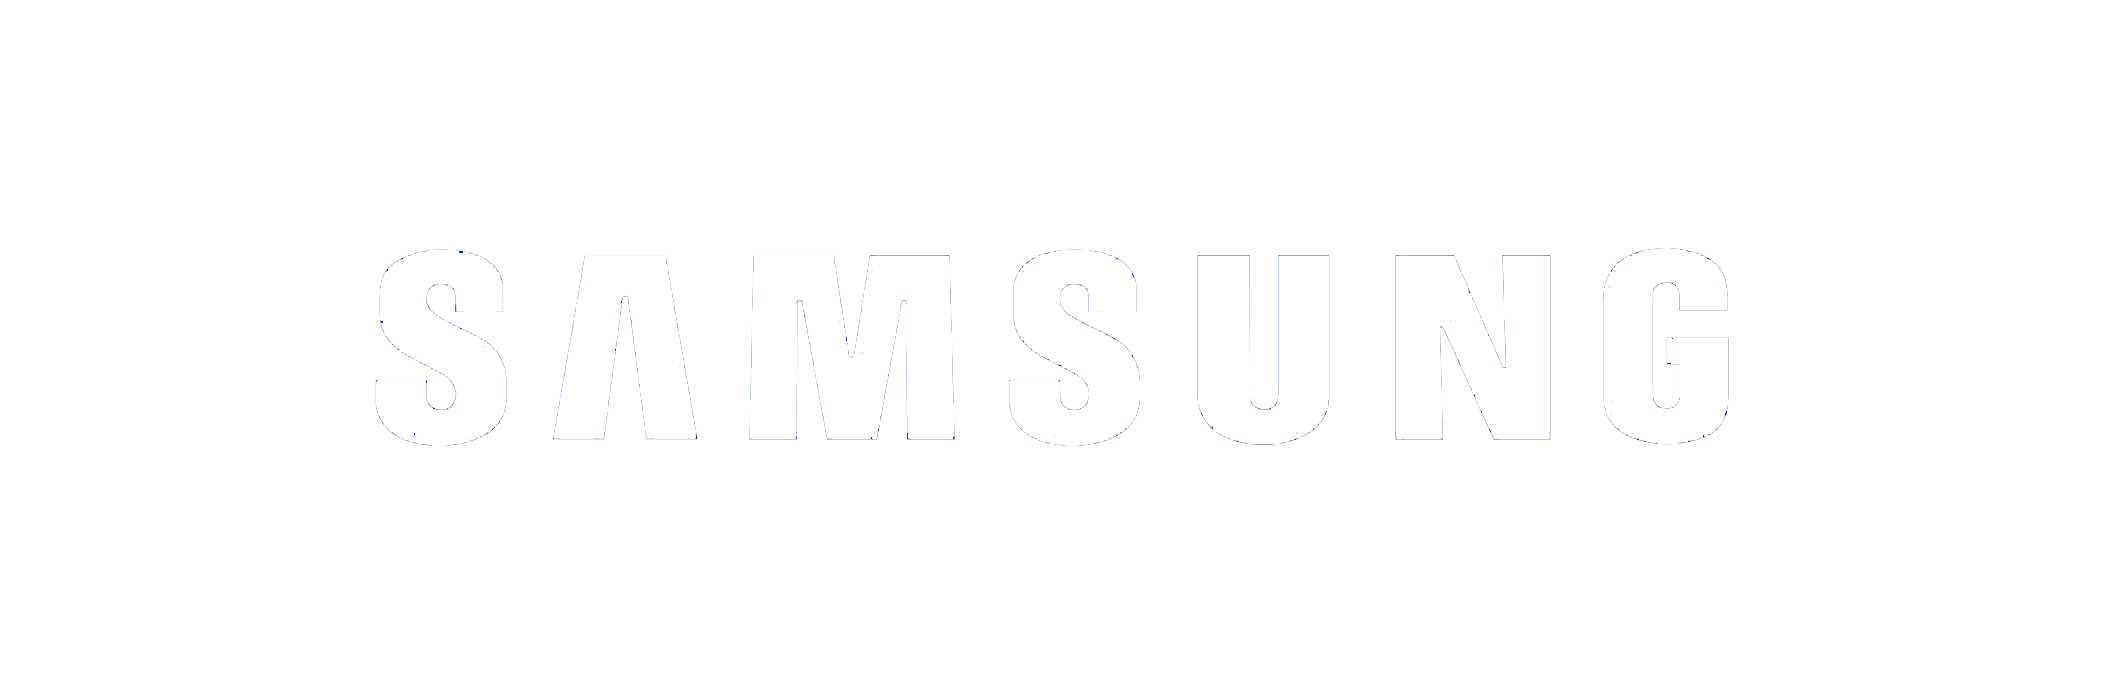 samsung-logo-white.png - Priority Communications